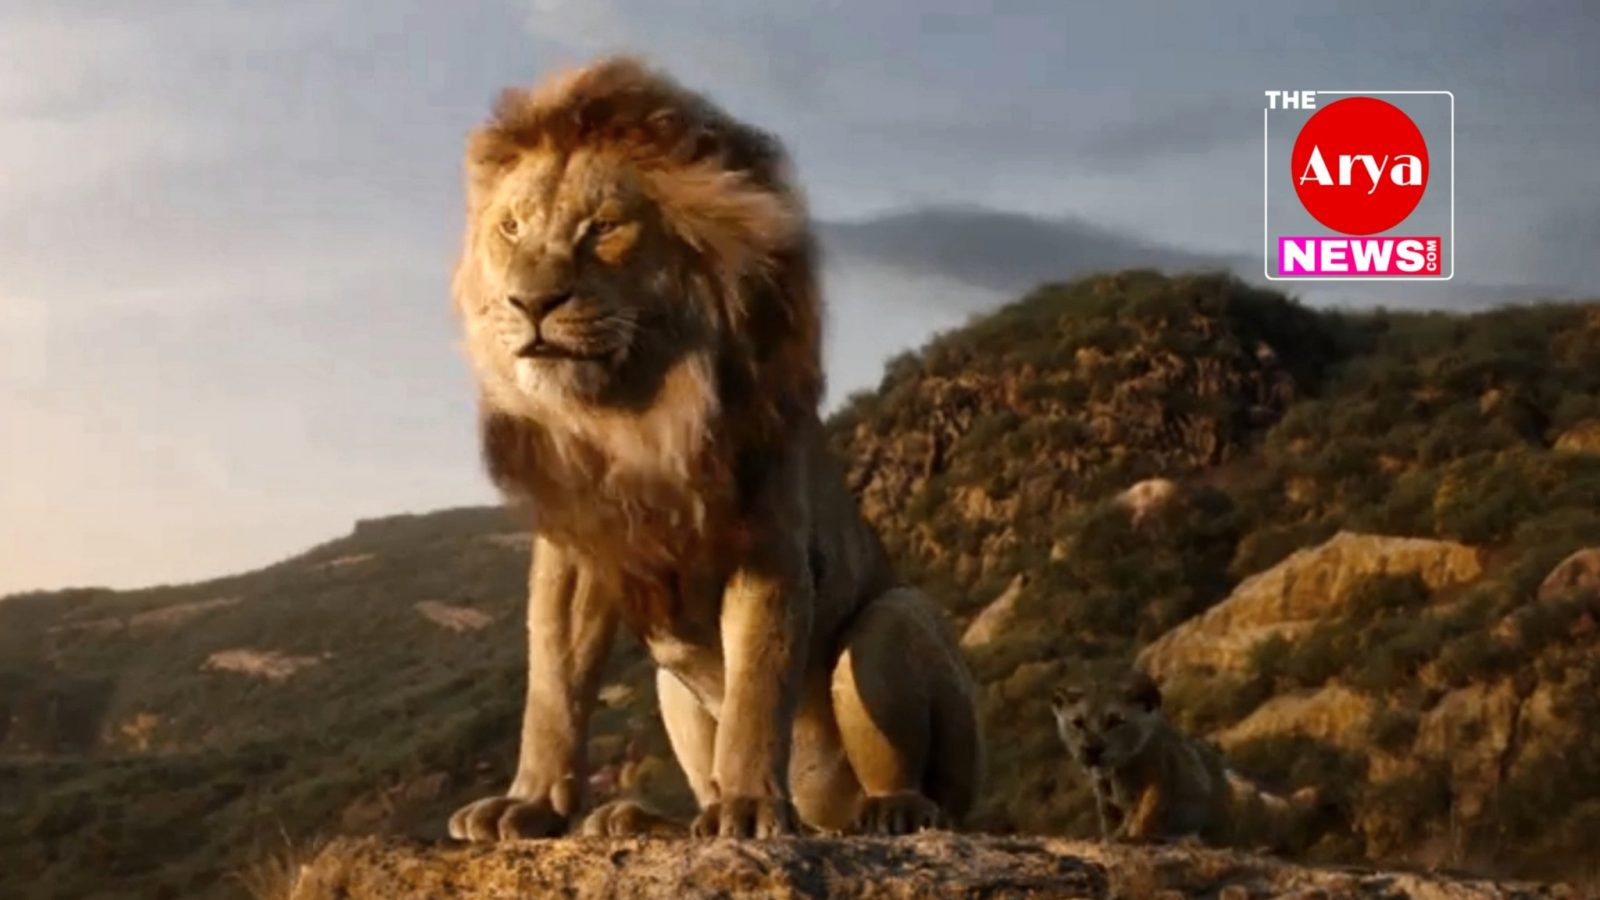 the lion king 4 full movie in hindi download